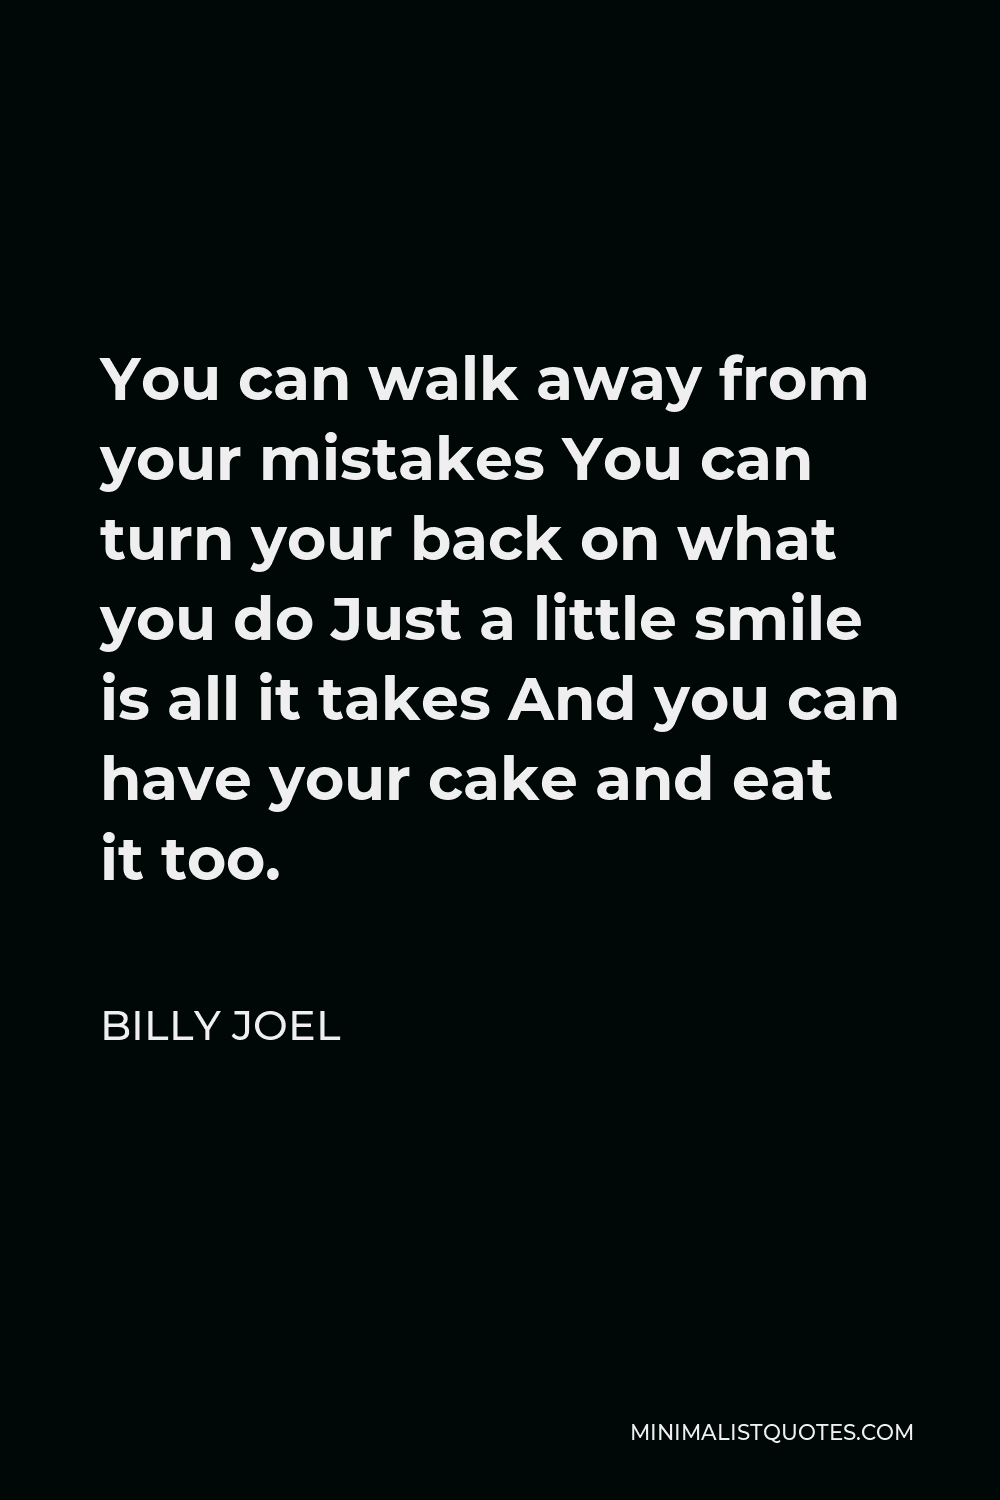 Billy Joel Quote - You can walk away from your mistakes You can turn your back on what you do Just a little smile is all it takes And you can have your cake and eat it too.